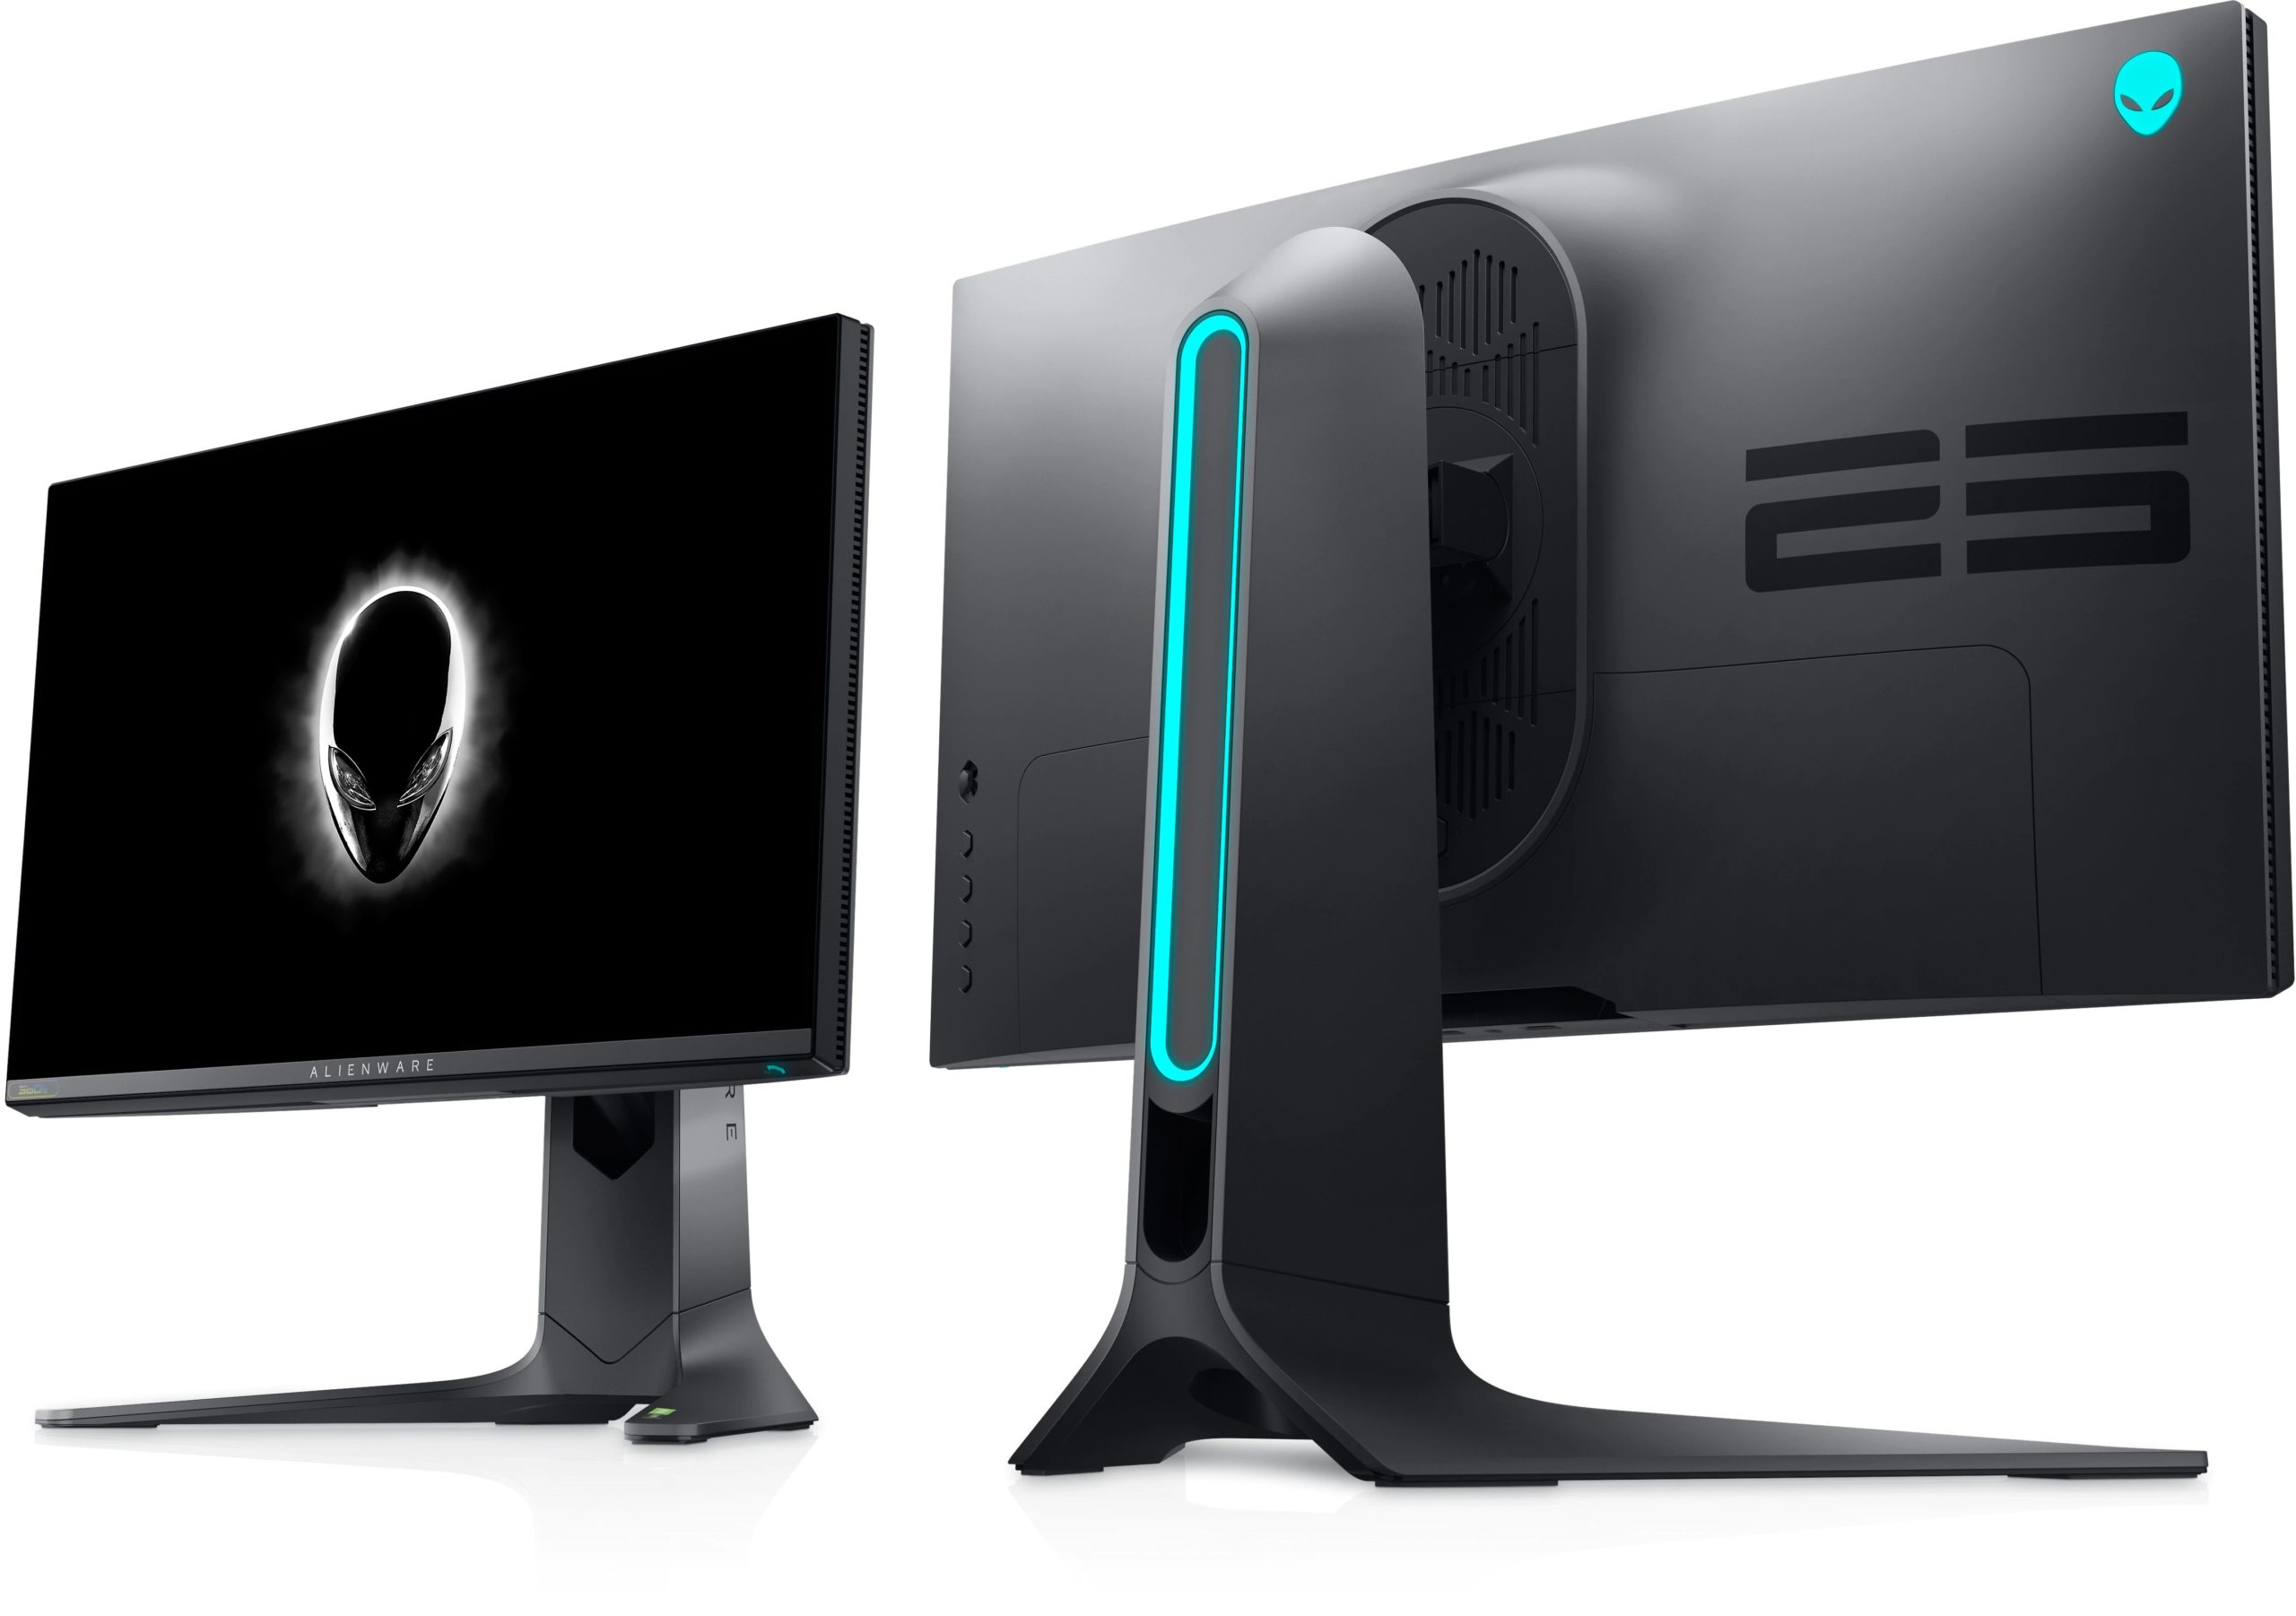 Alienware AW2521H 24.5 Inch Full HD (1920x1080) Gaming Monitor